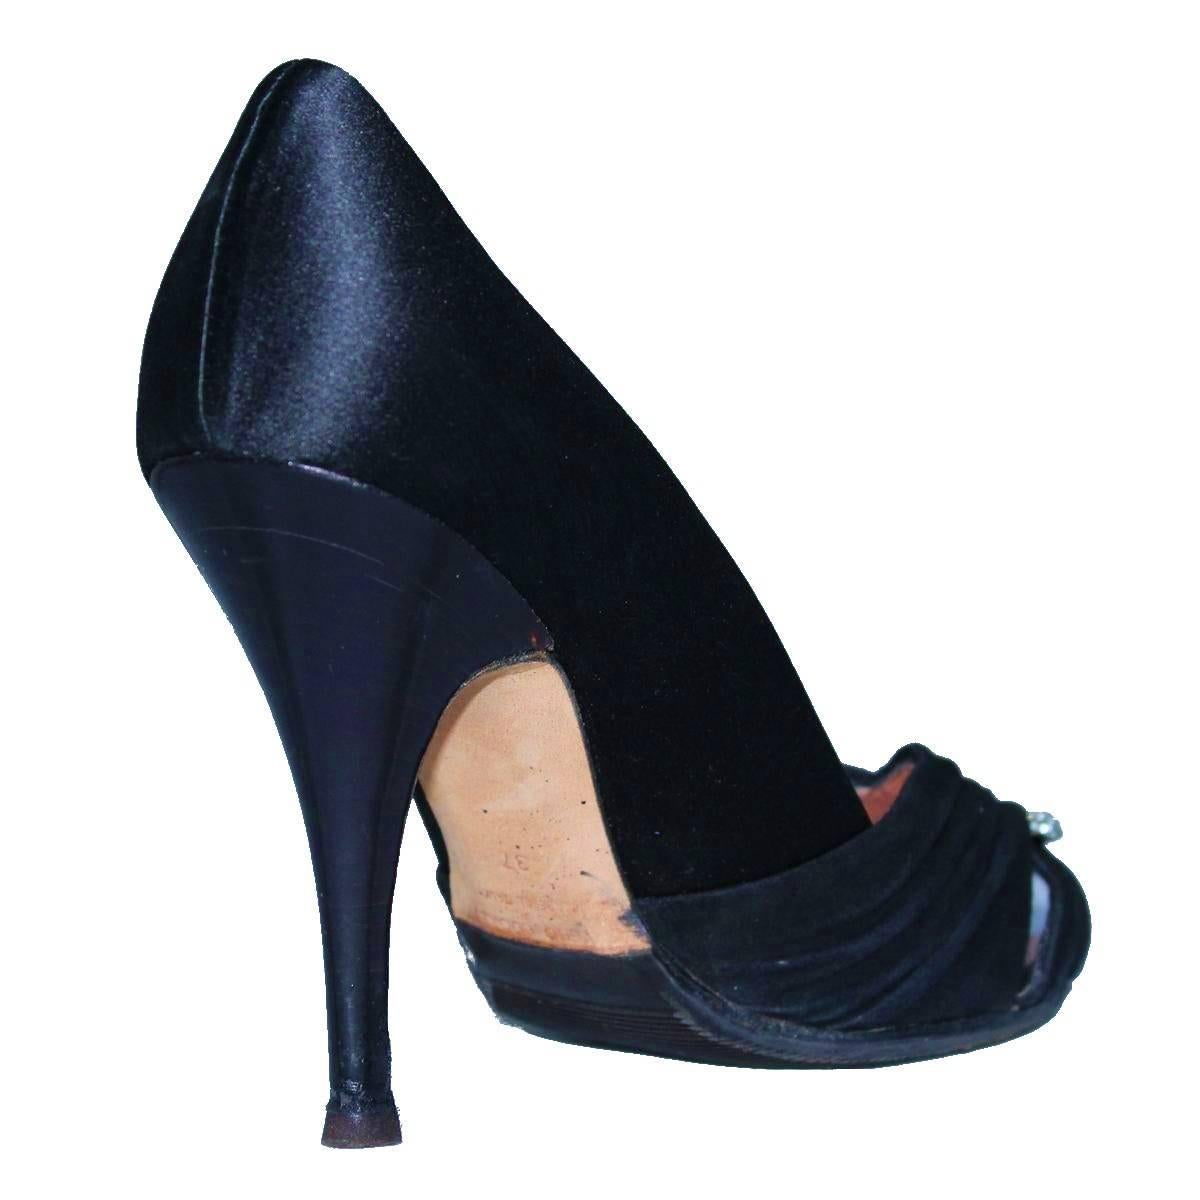 Beautiful pair of Giuseppe Zanotti Design open toe décolleté
Satin and buckskin
Black color
Applied rhinestones
Heel height cm 10 (3.93 inches)
Rubber antislip sole applied lately
Size 37 
Made in Italy
Worldwide express shipping included in the